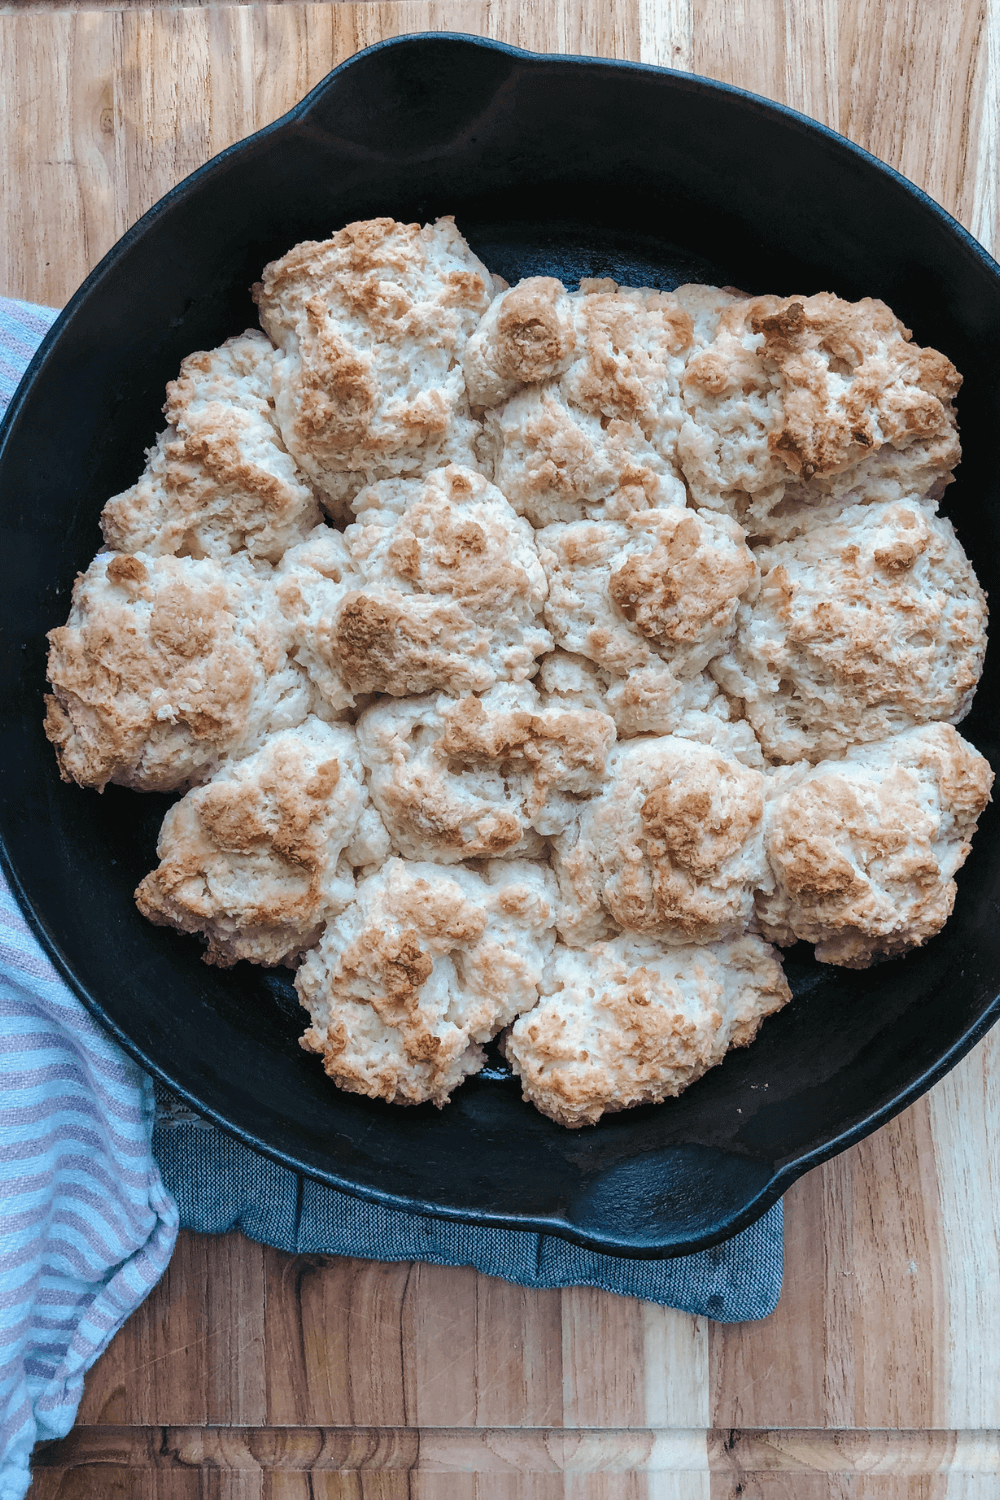 biscuits in cast iron